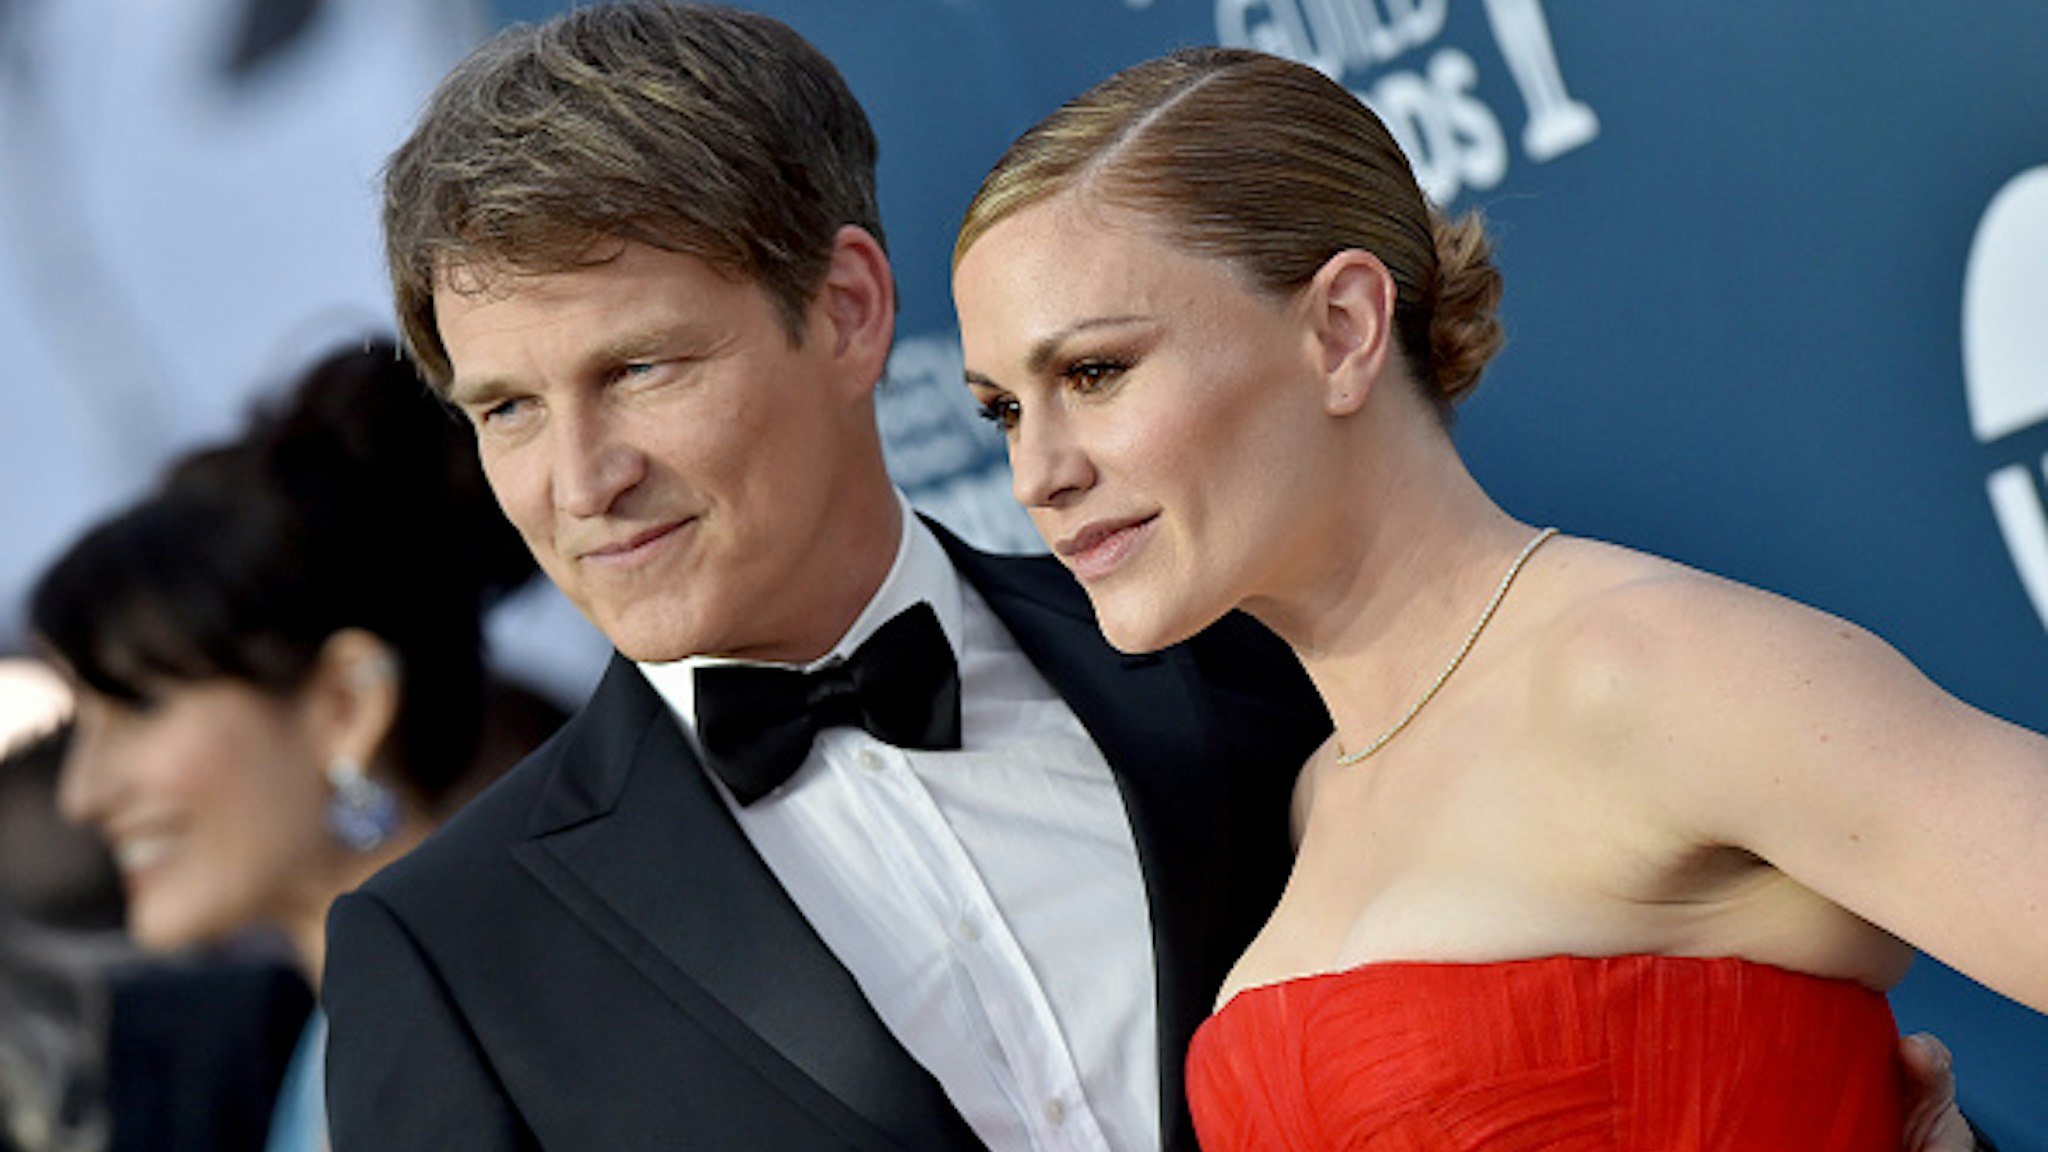 LOS ANGELES, CALIFORNIA - JANUARY 19: Stephen Moyer and Anna Paquin attend the 26th Annual Screen Actors Guild Awards at The Shrine Auditorium on January 19, 2020 in Los Angeles, California.